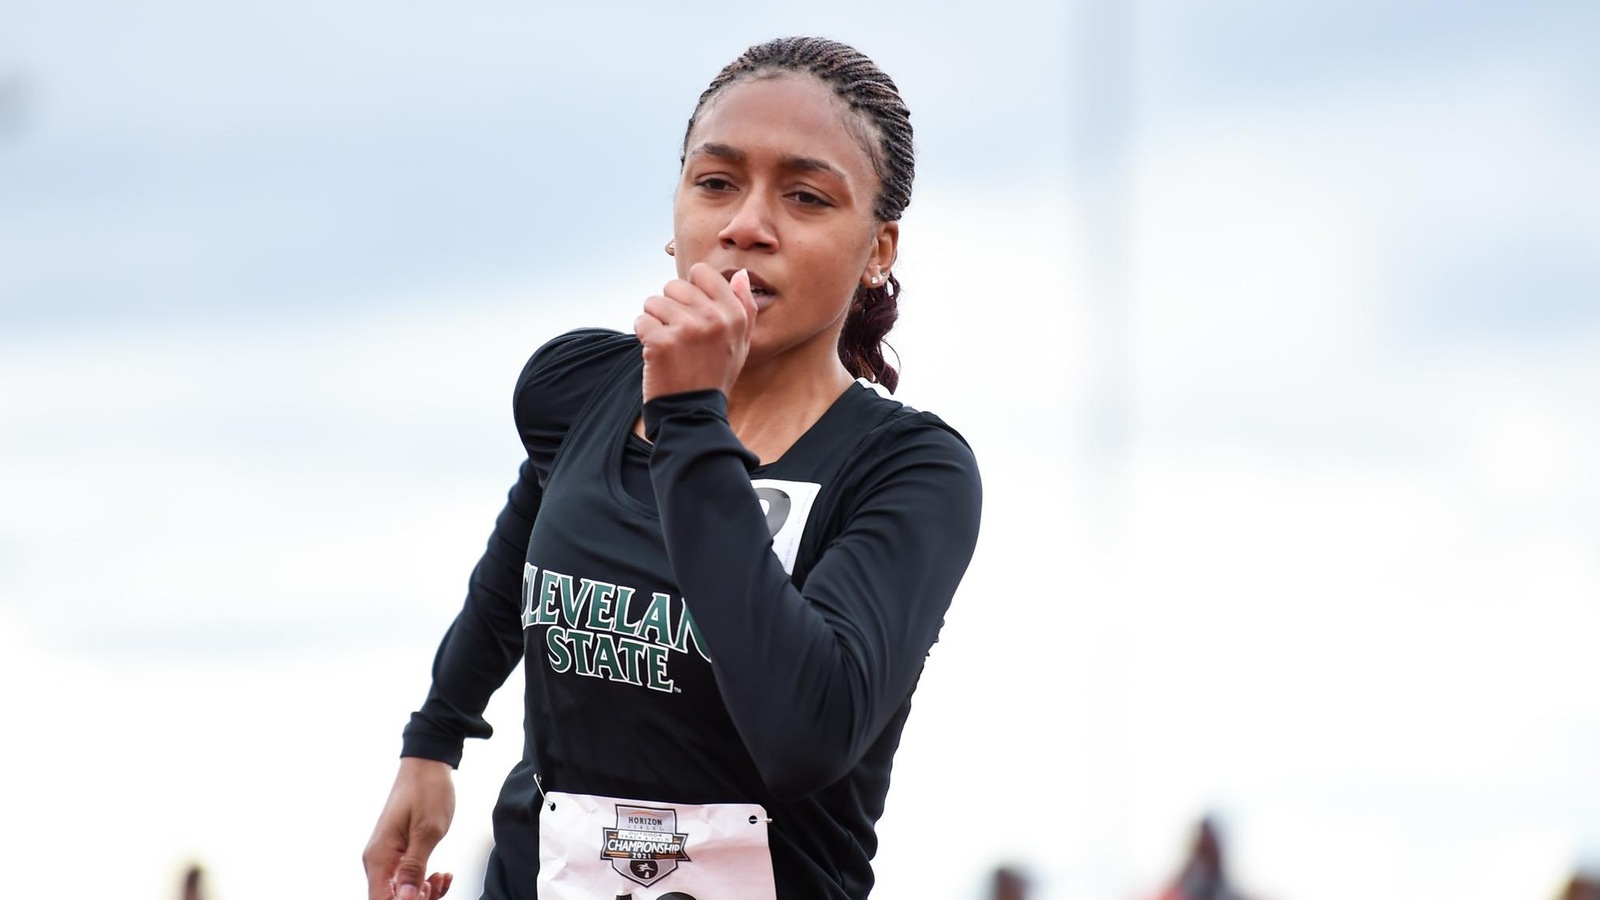 Cleveland State Track & Field Returns To Action At Jesse Owens Invite